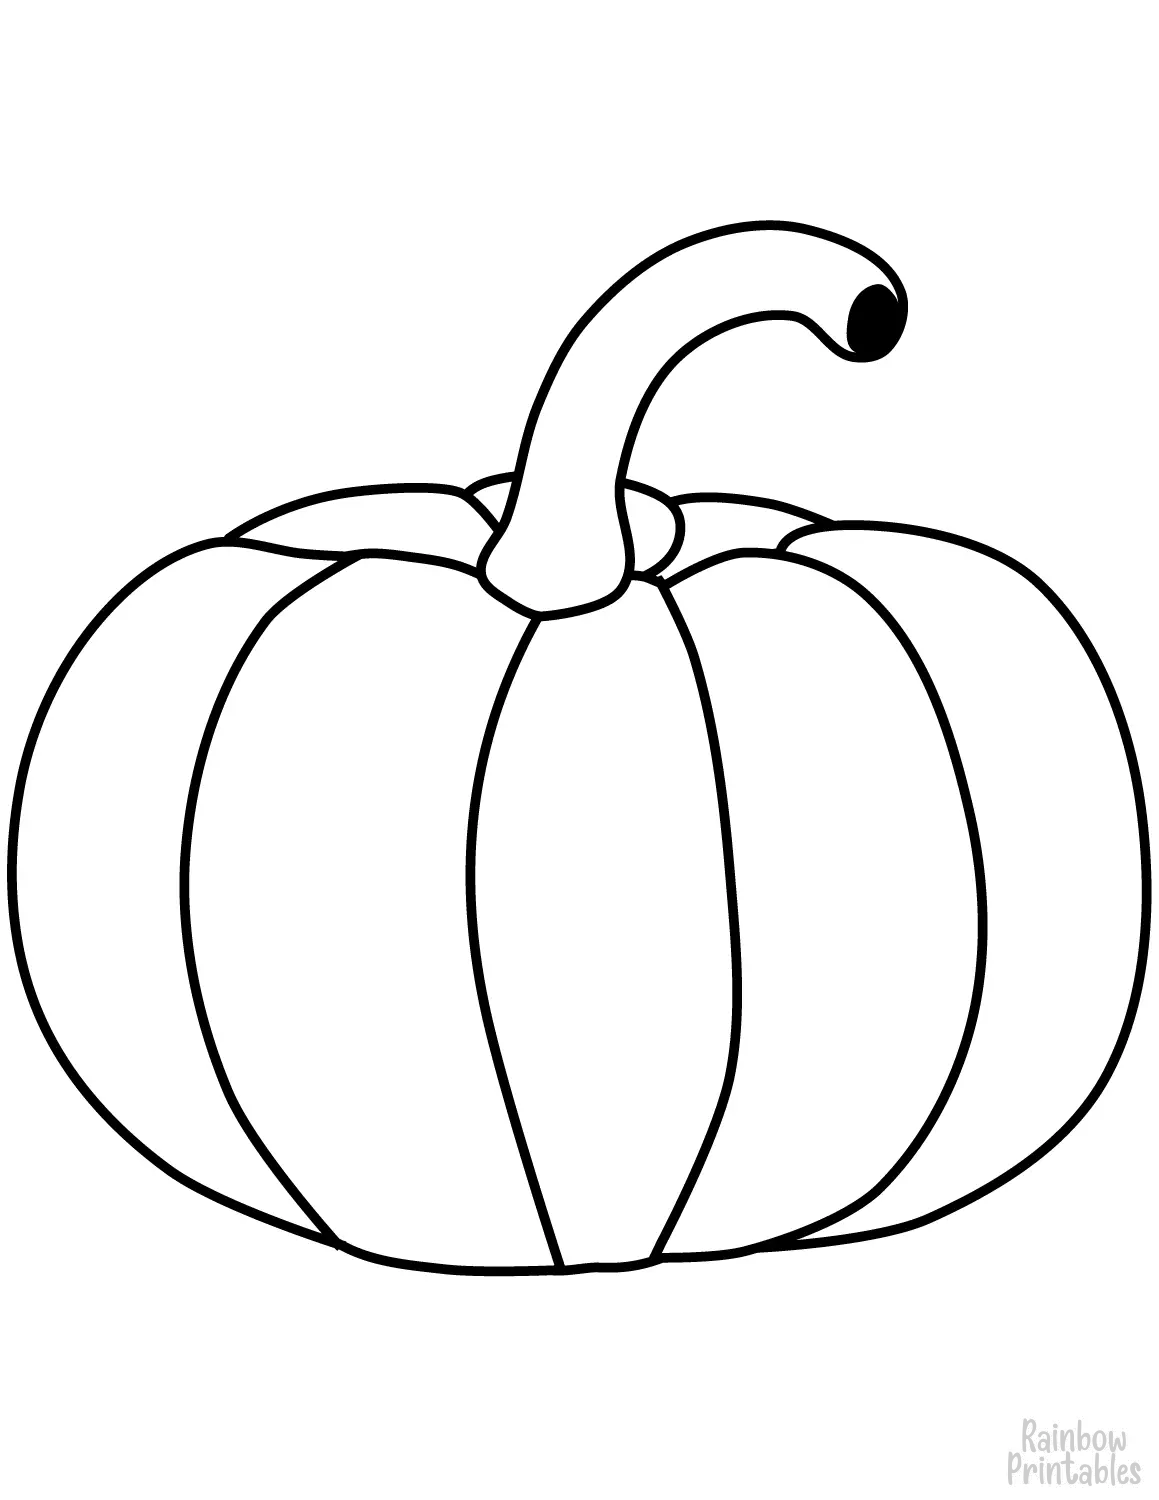 FRUIT PUMPKIN Clipart Coloring Pages Line Art Drawings for Kids-01